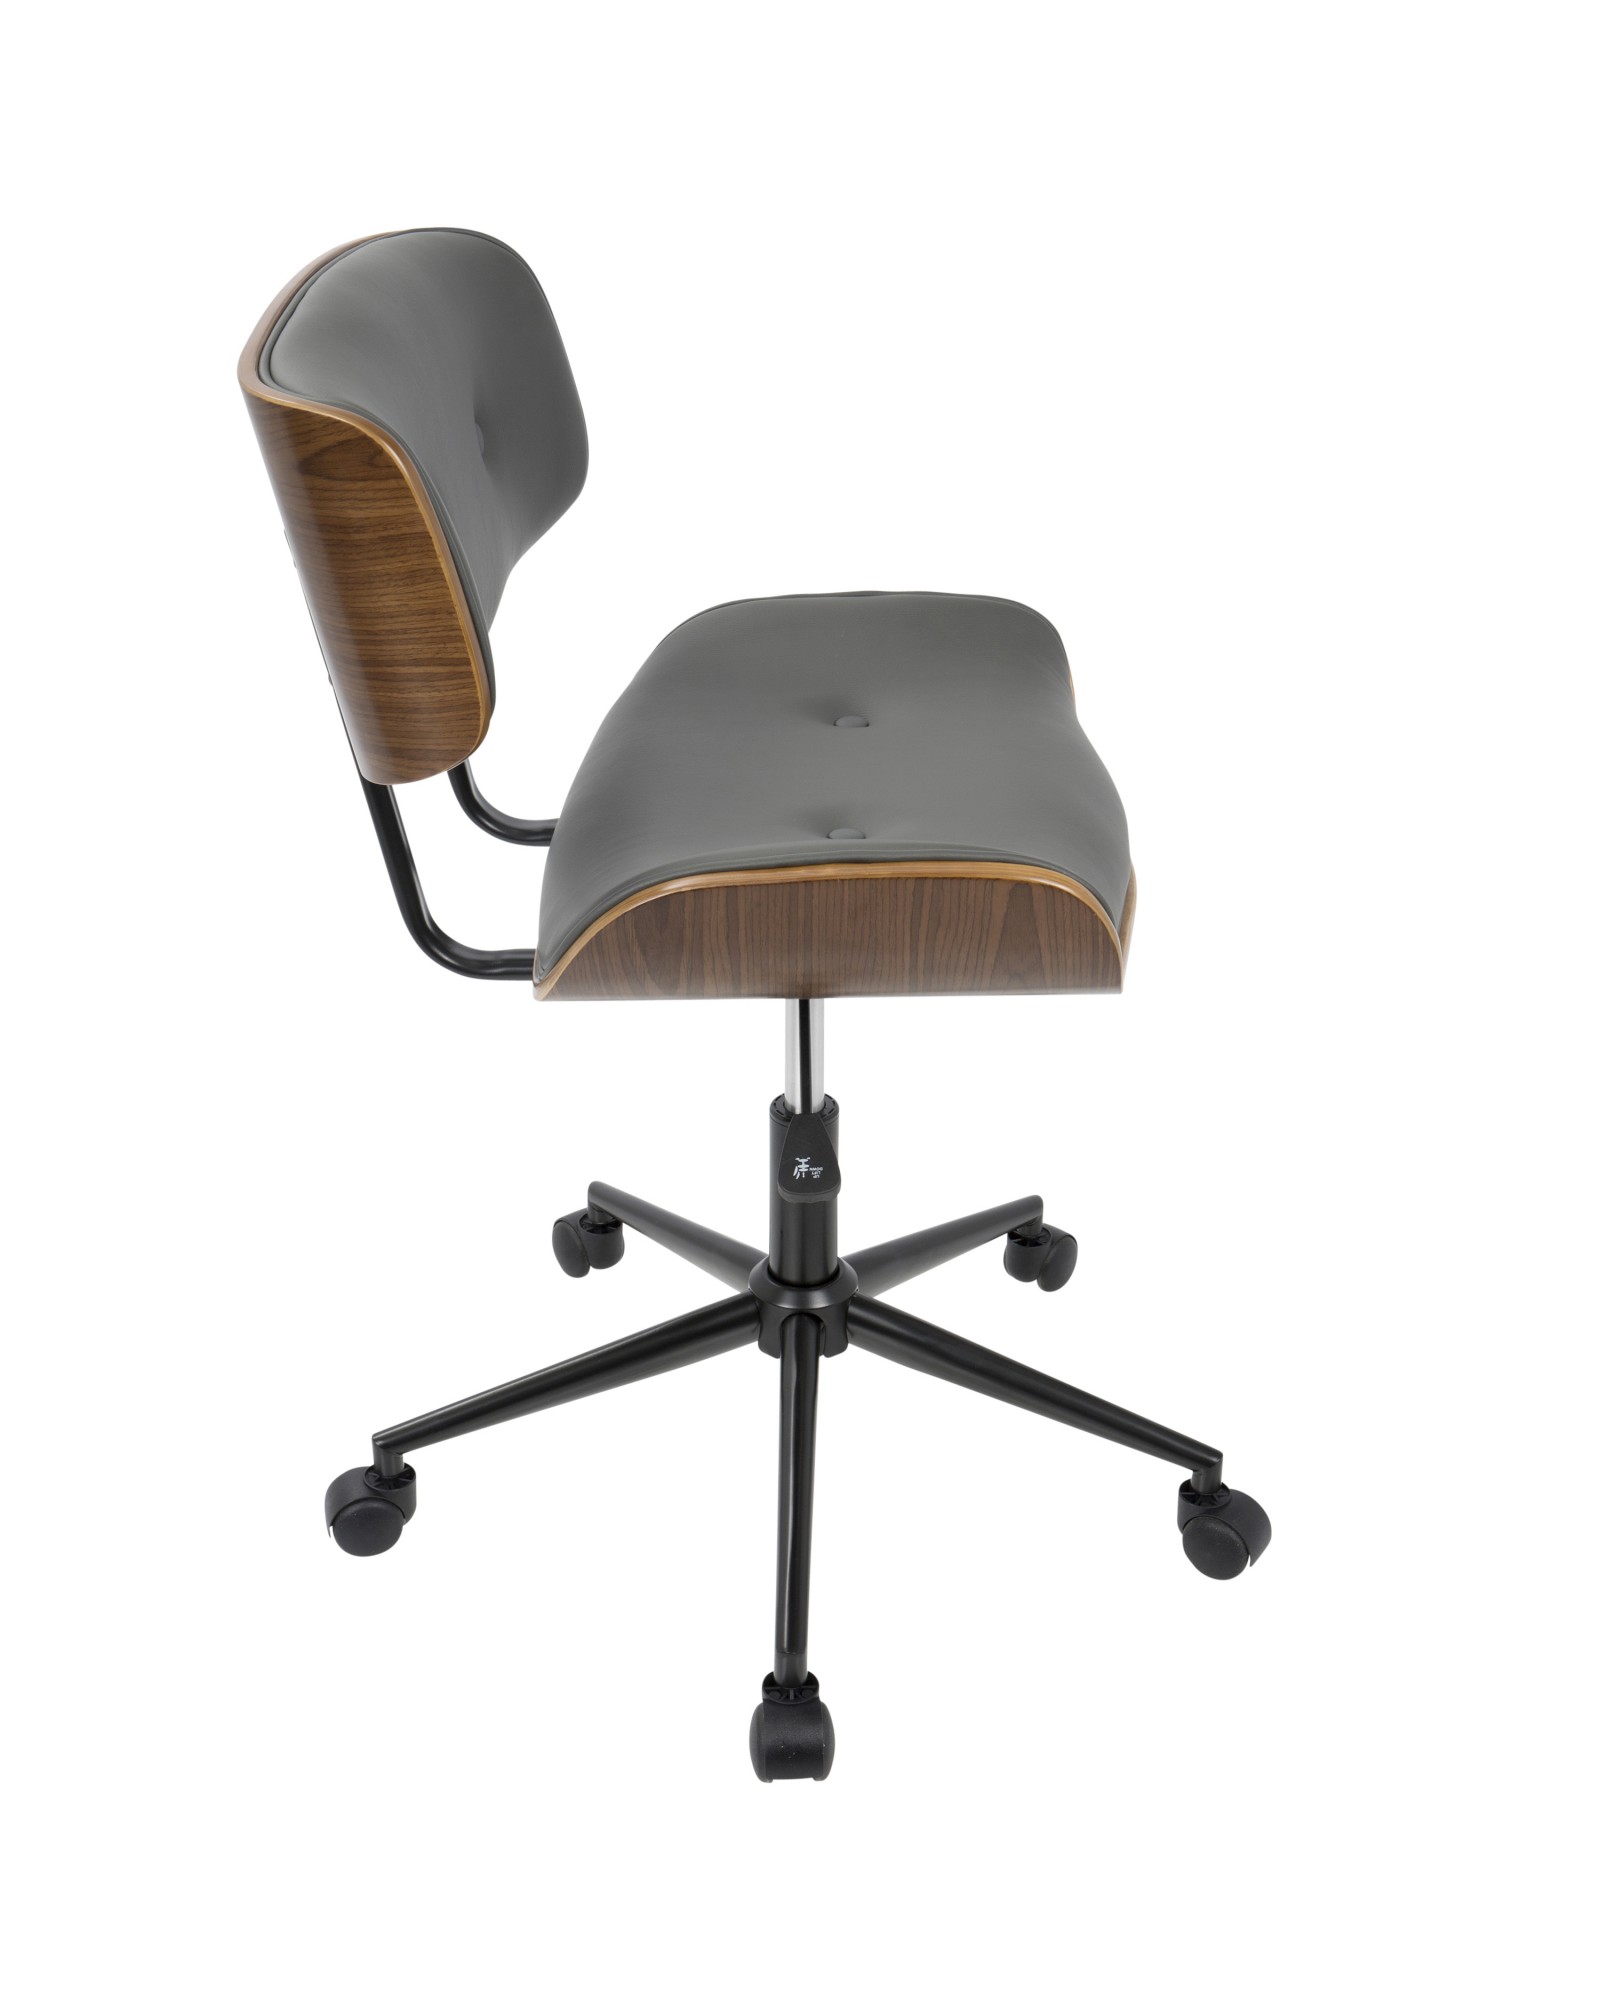 Lombardi Mid-Century Modern Adjustable Office Chair with Swivel in Walnut and Grey